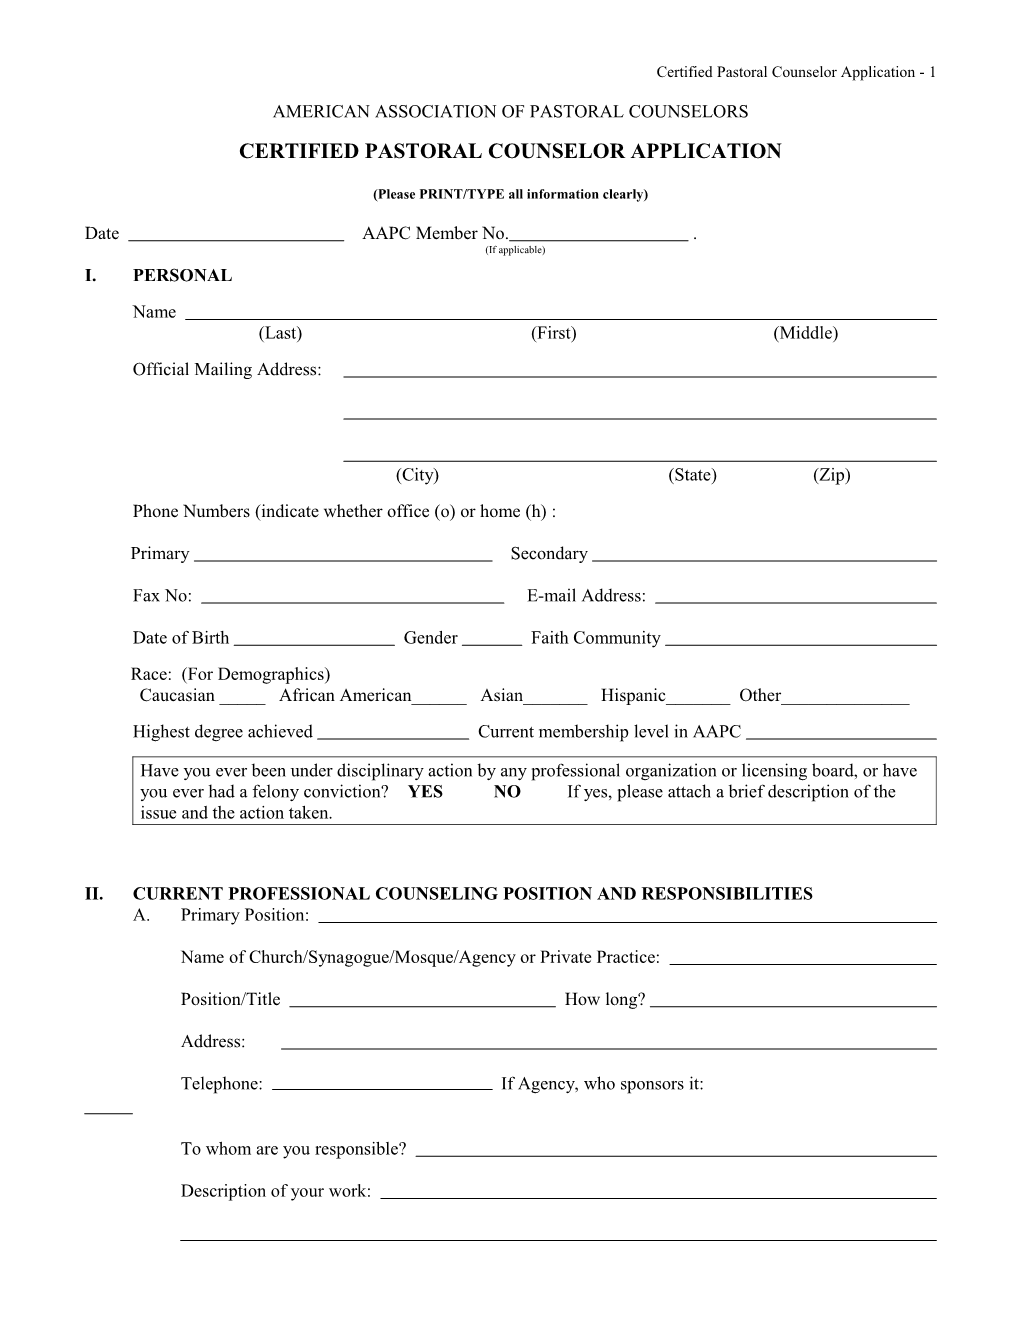 Certified Pastoral Counselor Application - 1